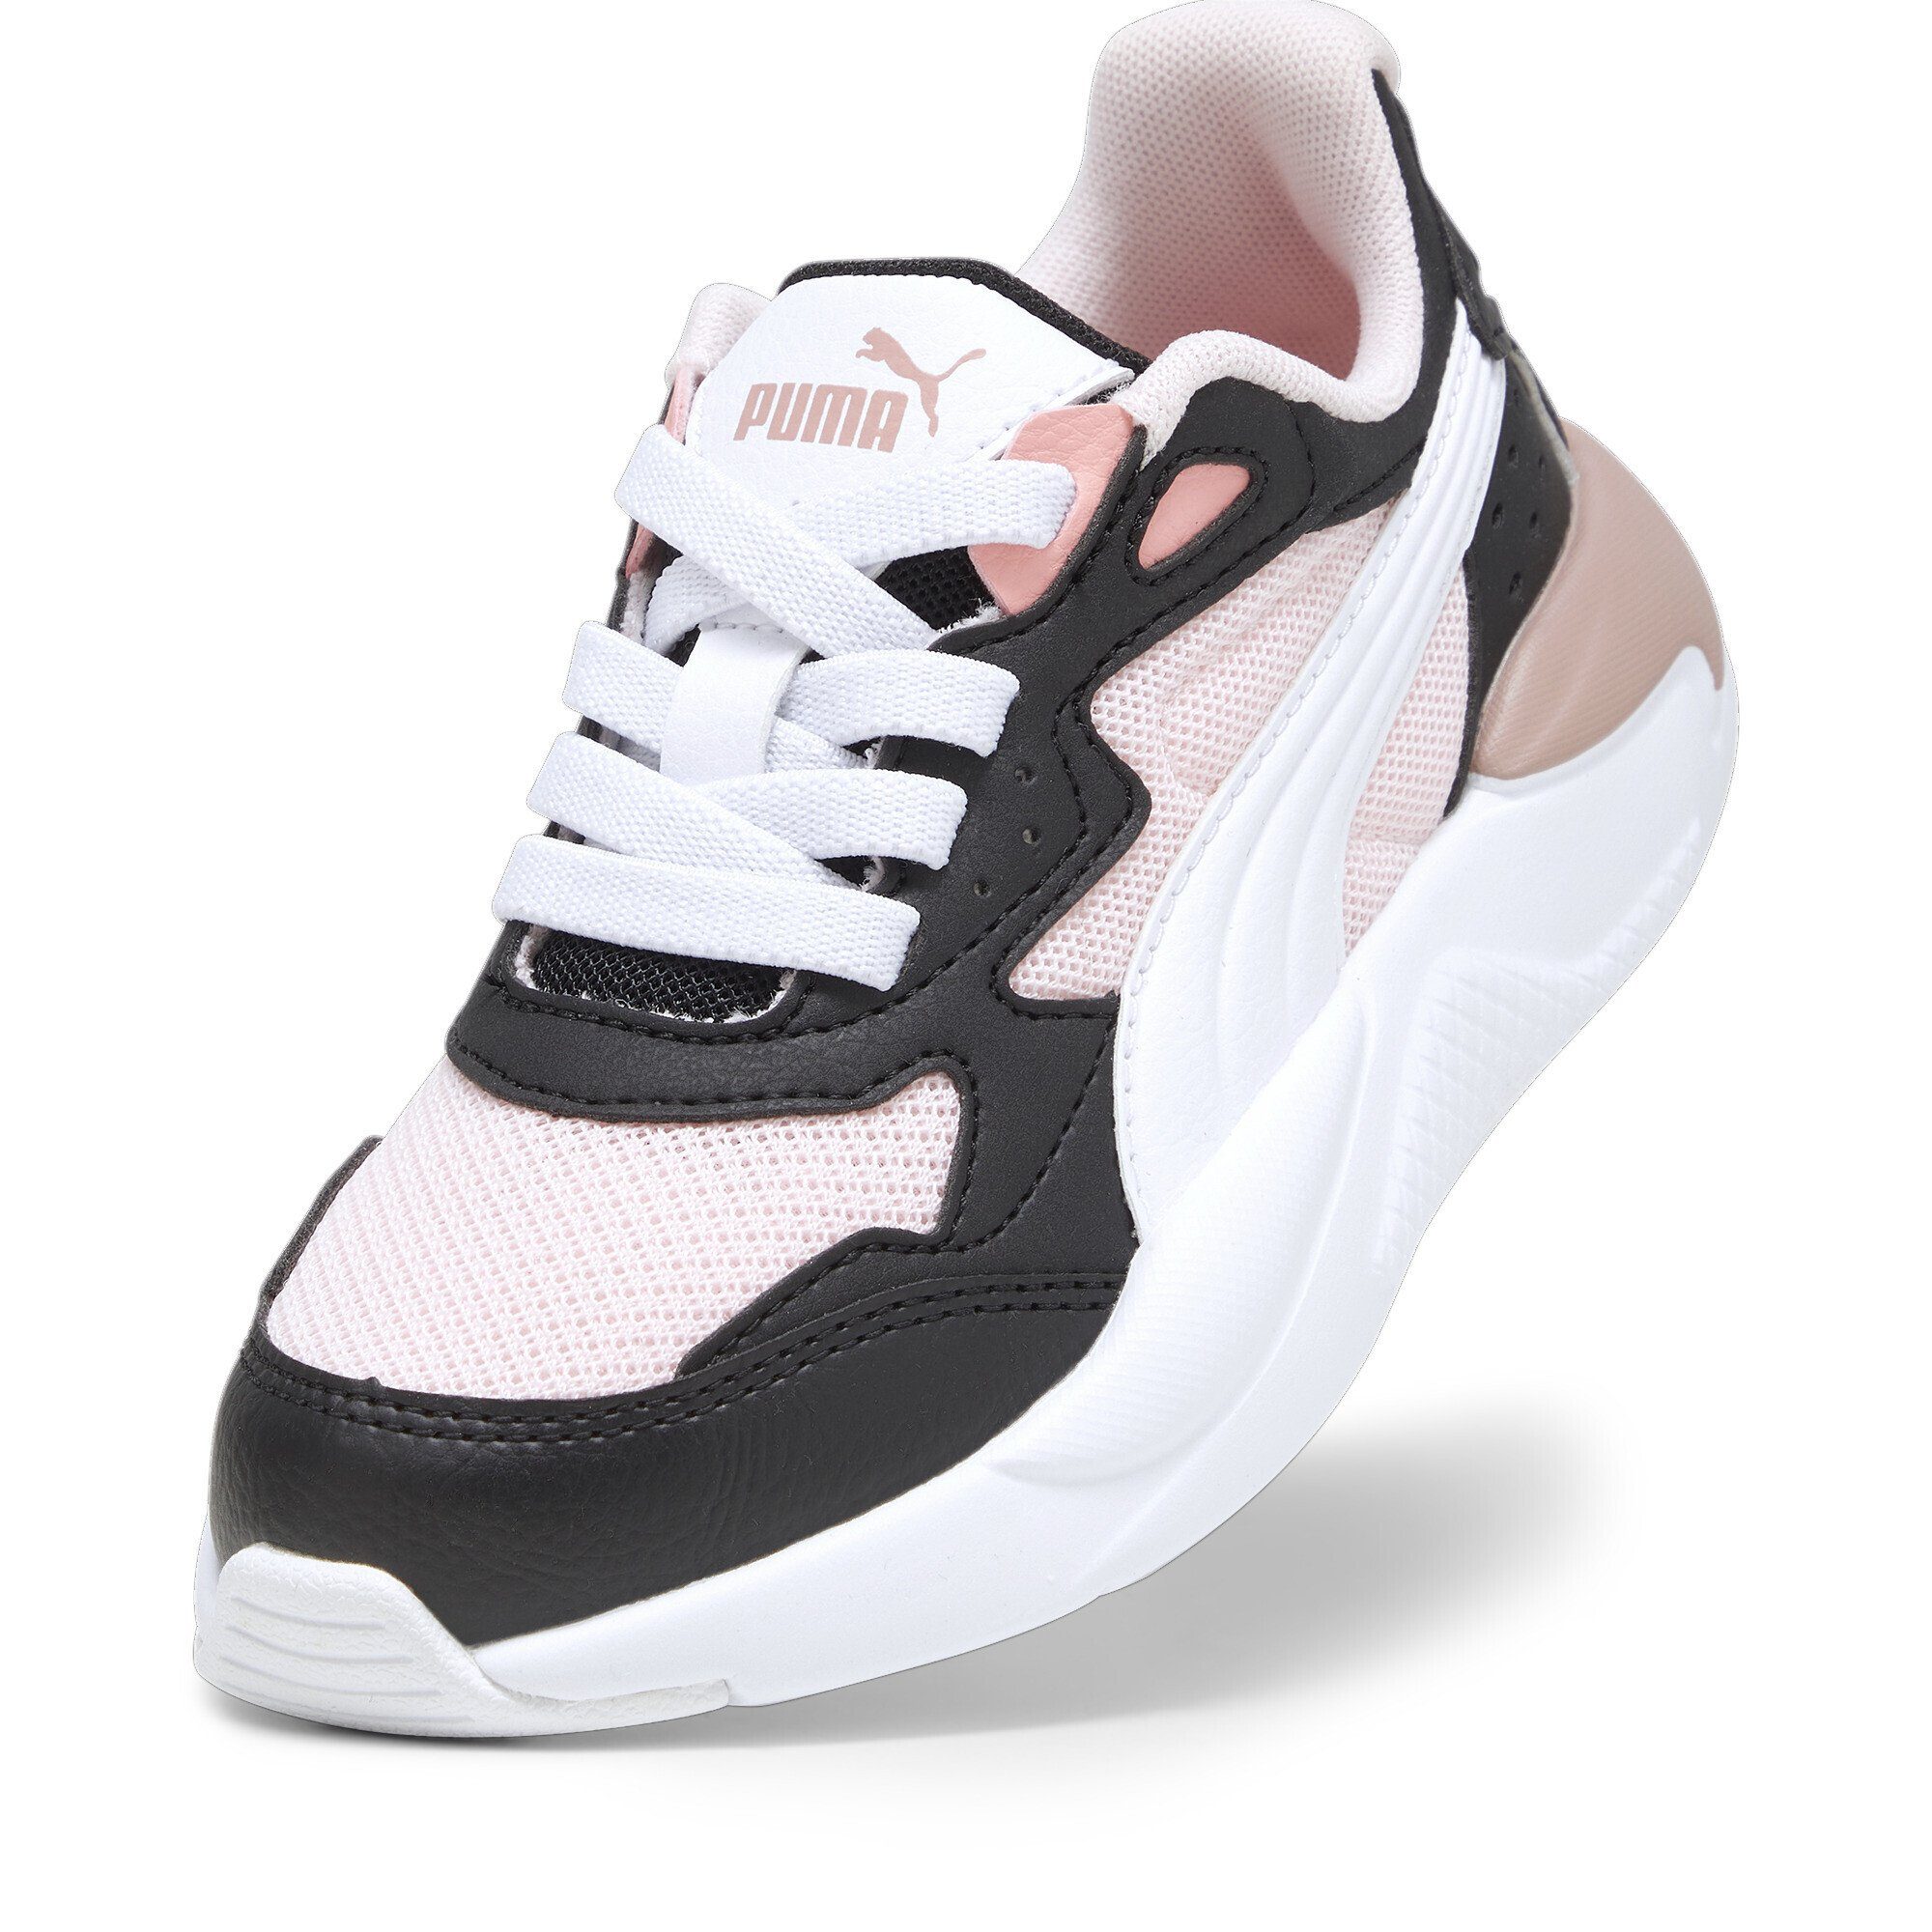 PUMA X-Ray Speed AC Peach Sneakers Black White Sneaker Frosty Smoothie Pink